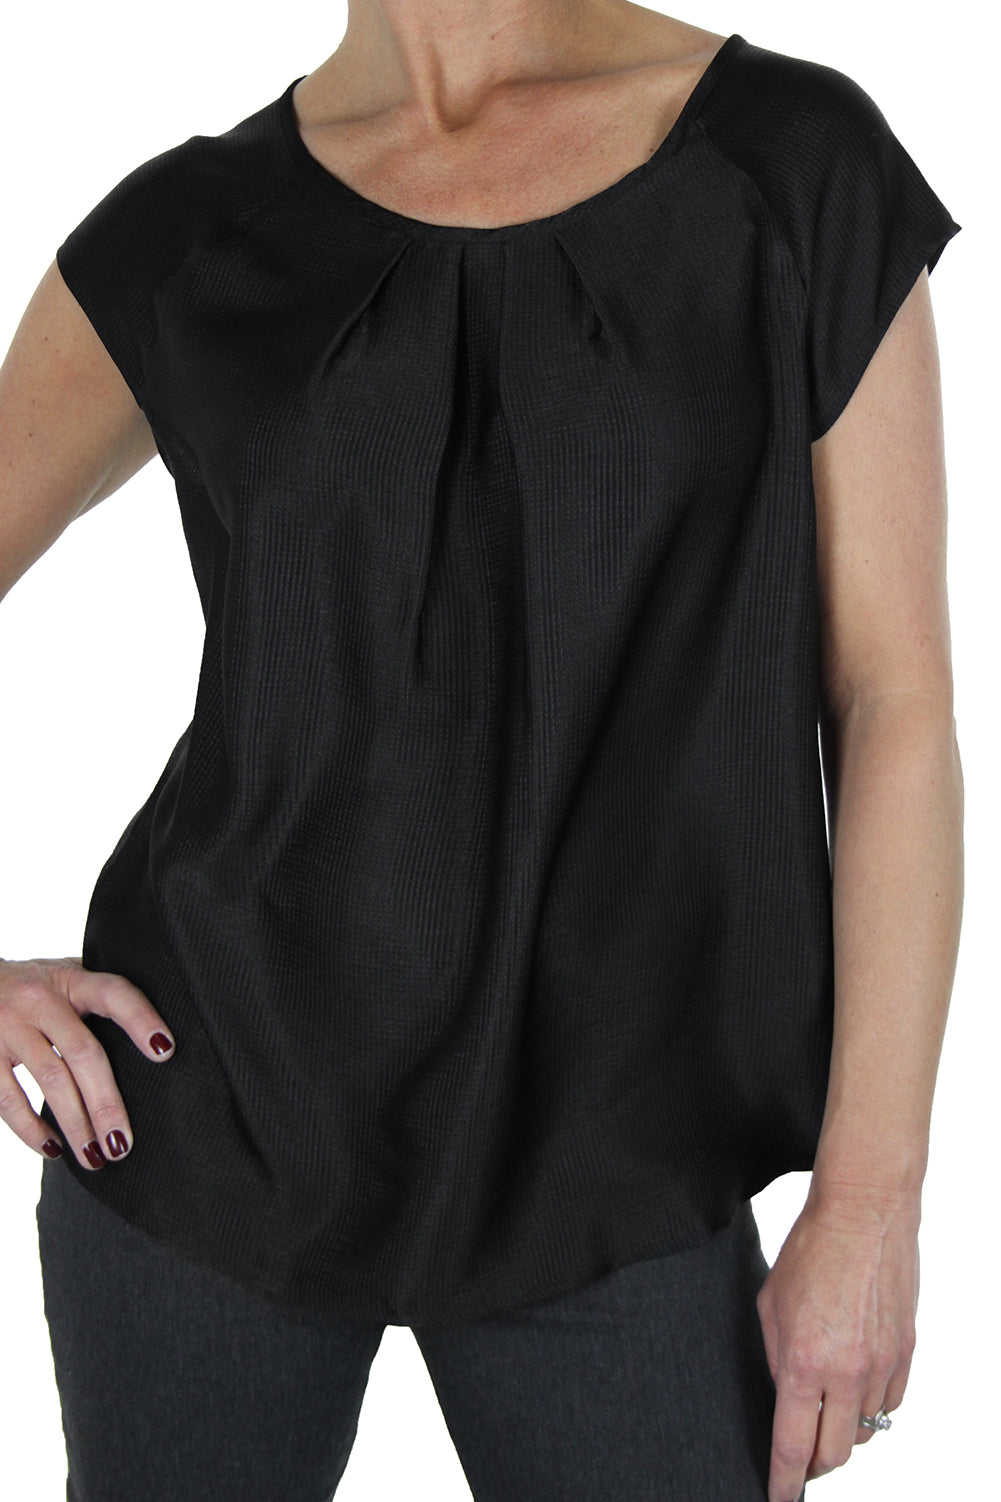 Silky Feel Textured Top With Shine Black